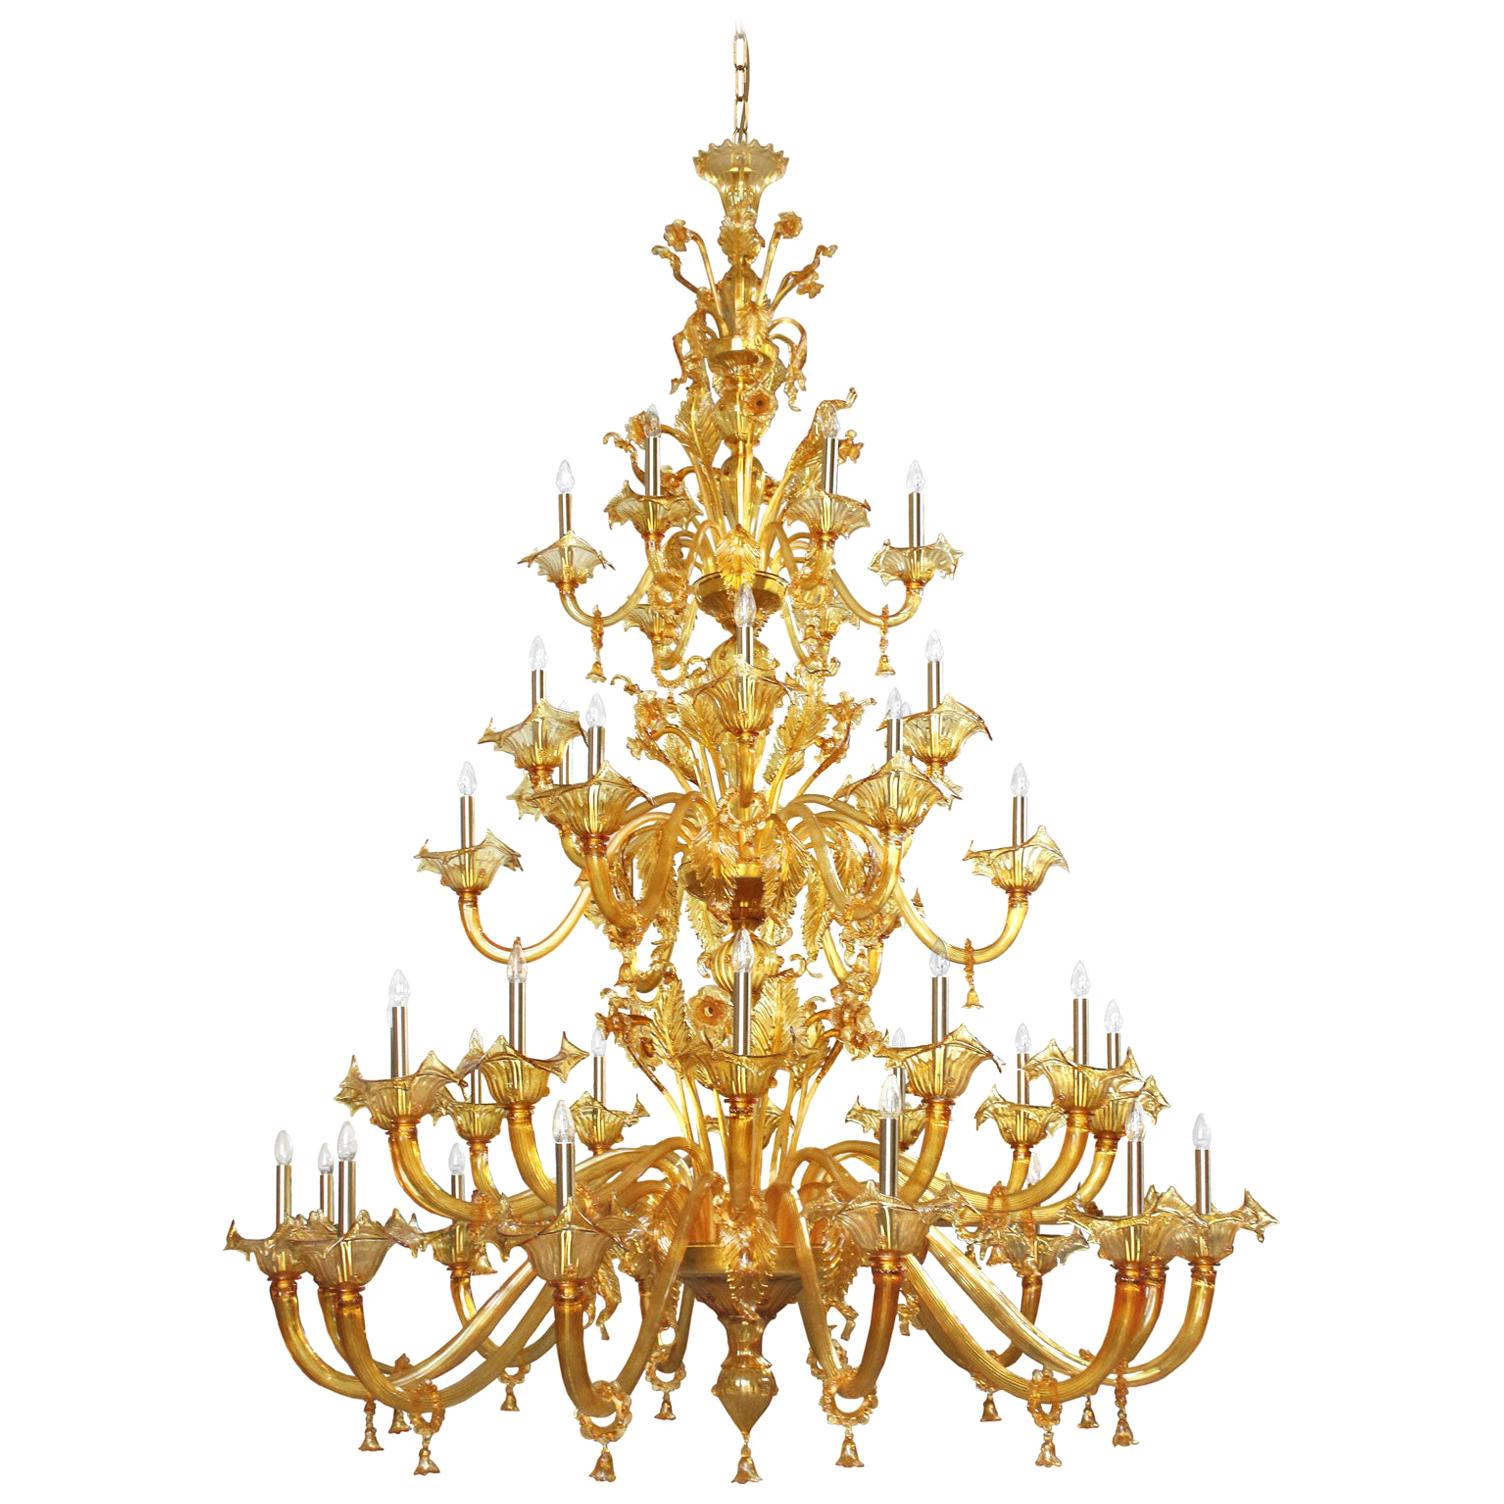 Venetian style Chandelier, 42 arms, 3 Tiers, Amber Murano Glass by Multiforme